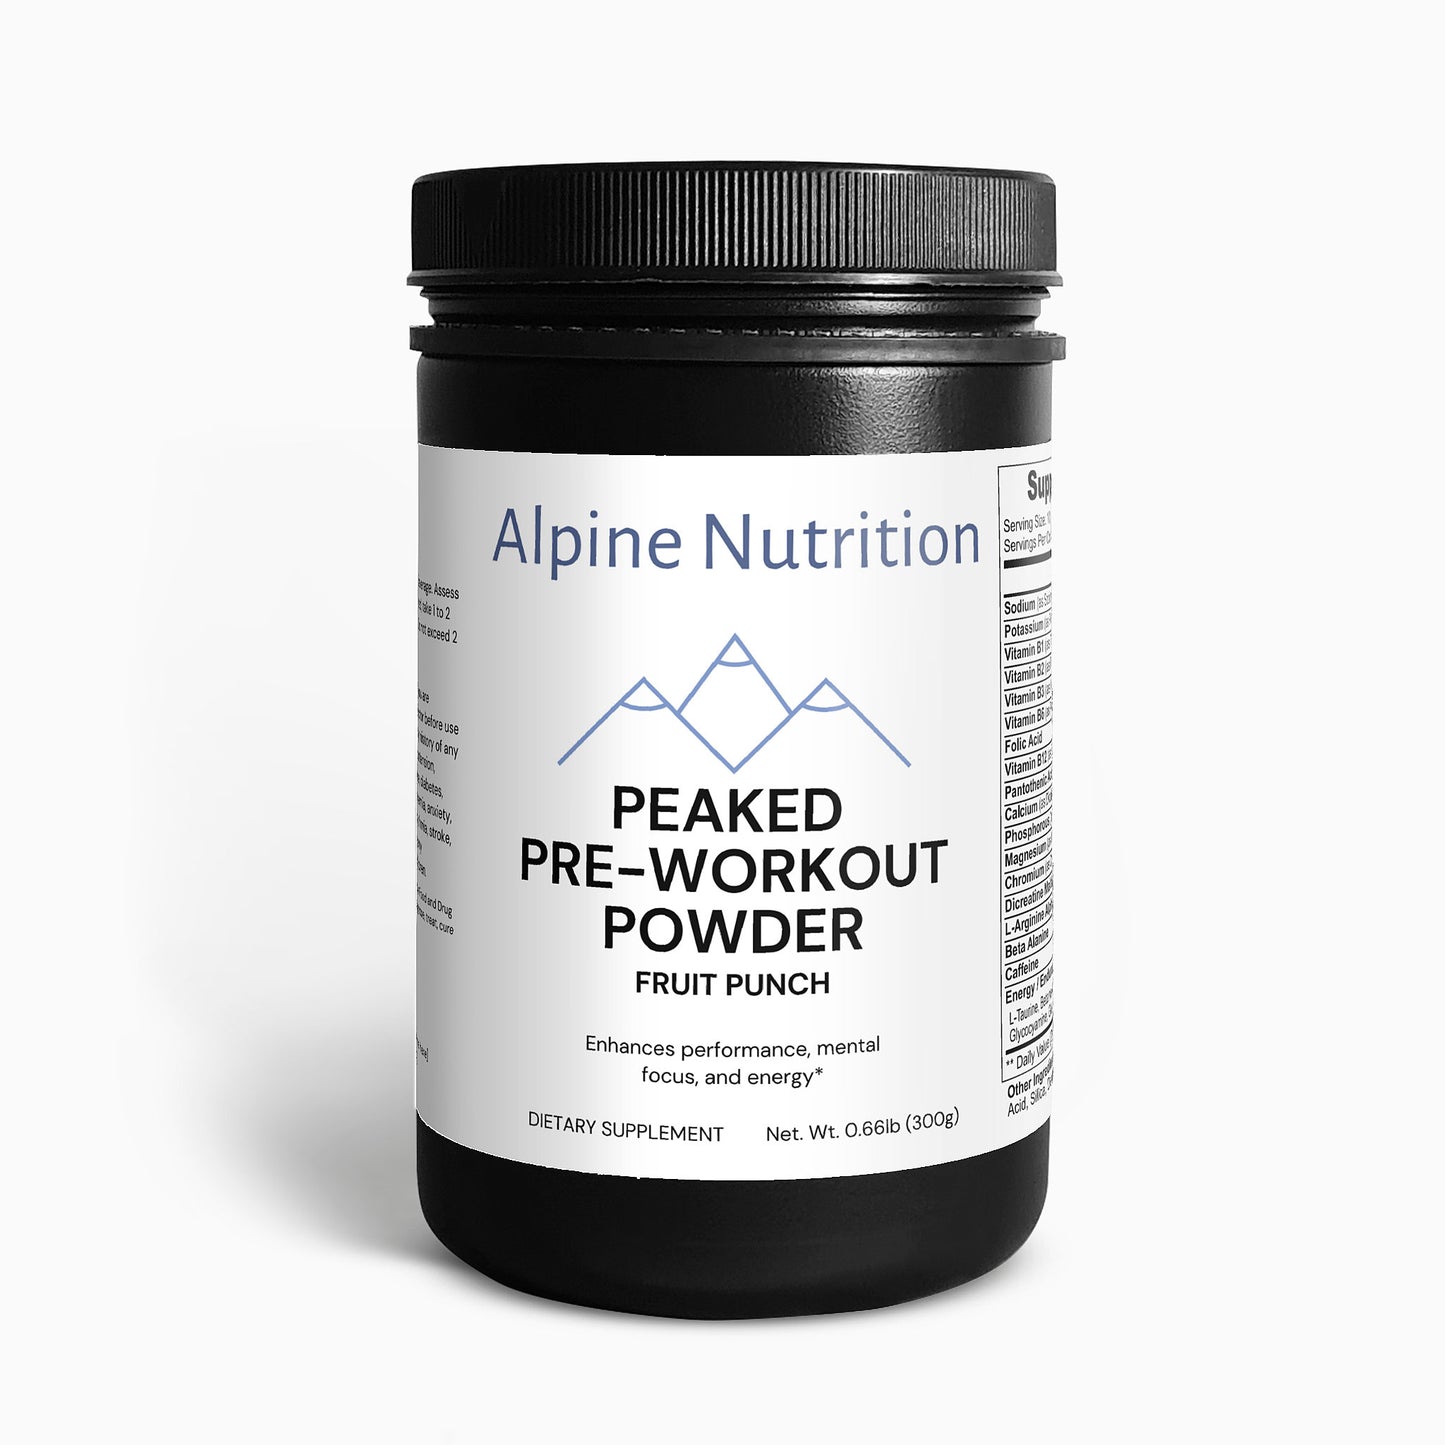 Peaked Pre-Workout Powder (Fruit Punch)